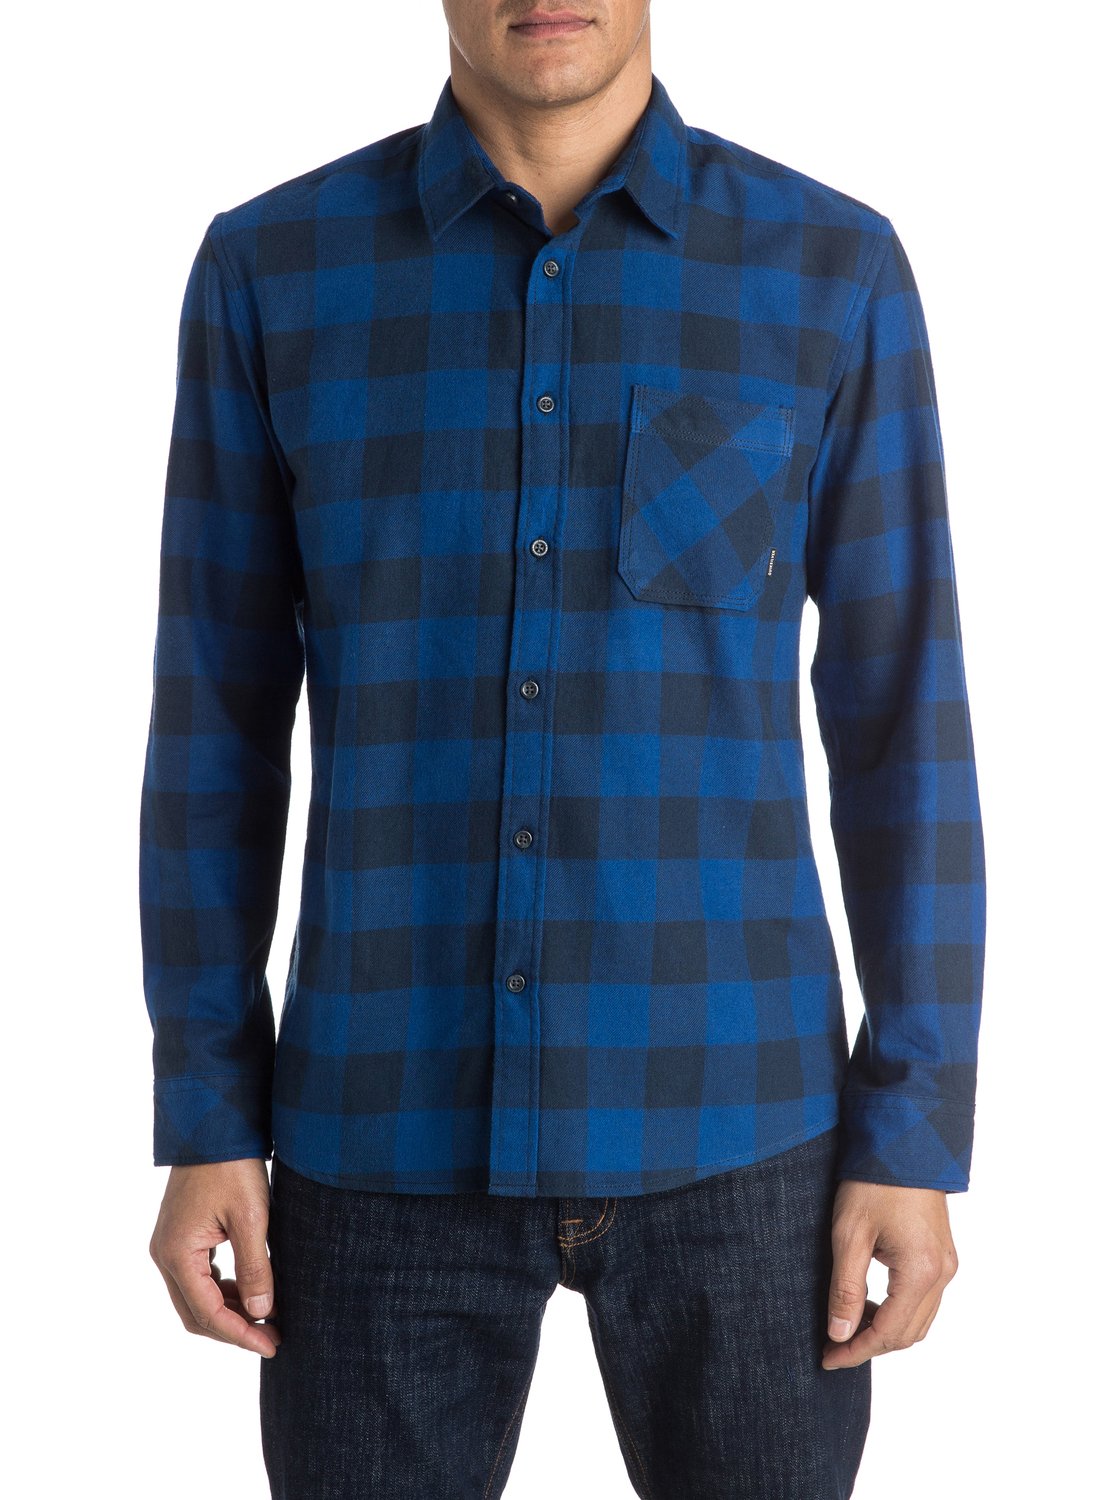 Motherfly Flannel - Chemise a manches longues pour homme - Quiksilver